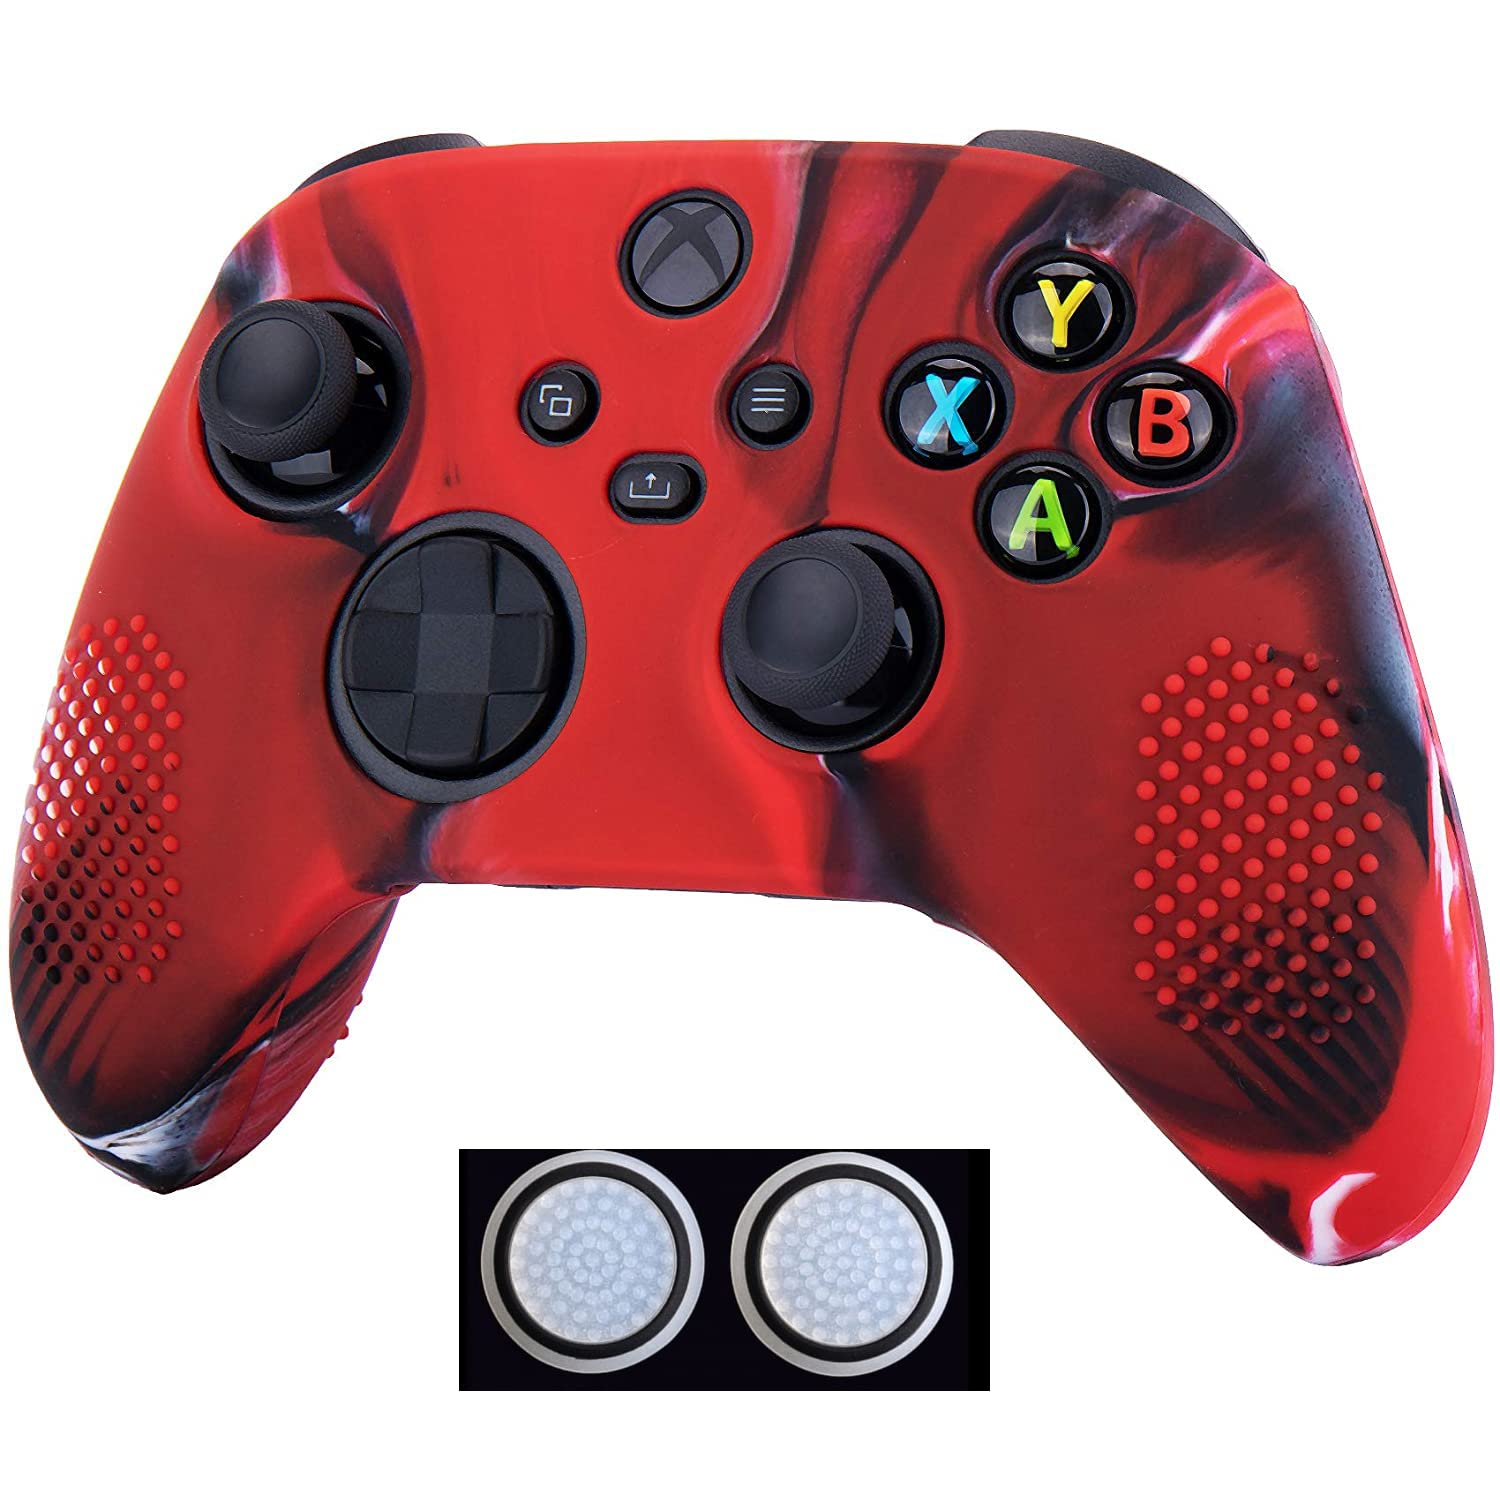 New World Silicone Cover Skin Case Protective Cover for Xbox Series X/S Controller With Anti-Slip Surface- 2 Thumb Grips Free- Red camouflage